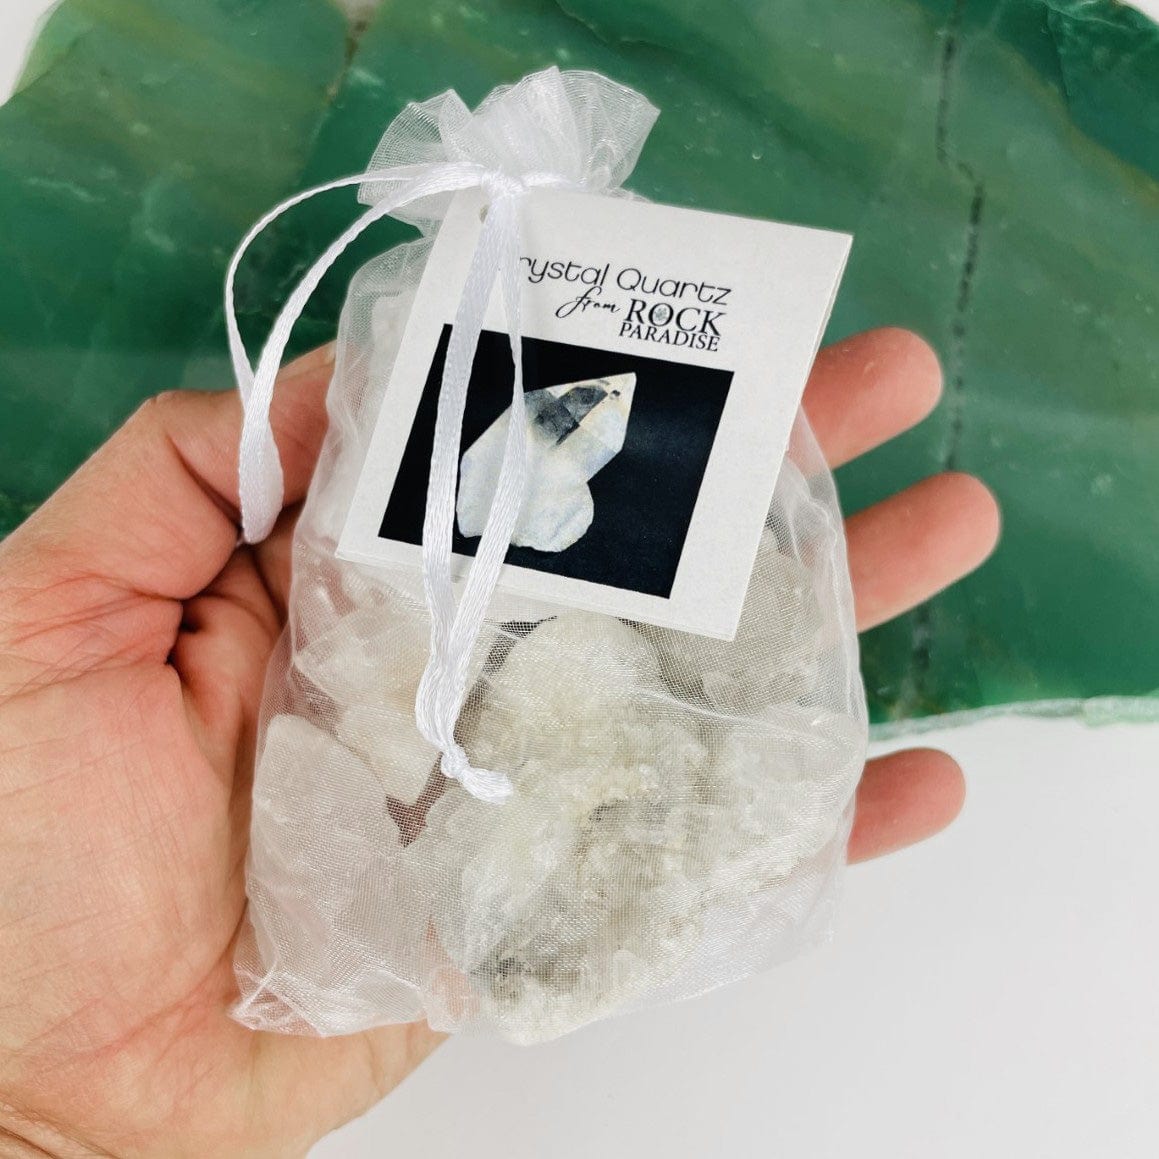 5 Crystal Clusters and Points "The Power Stones" Set in an organza bag tied and tagged with information card in a hand for size reference